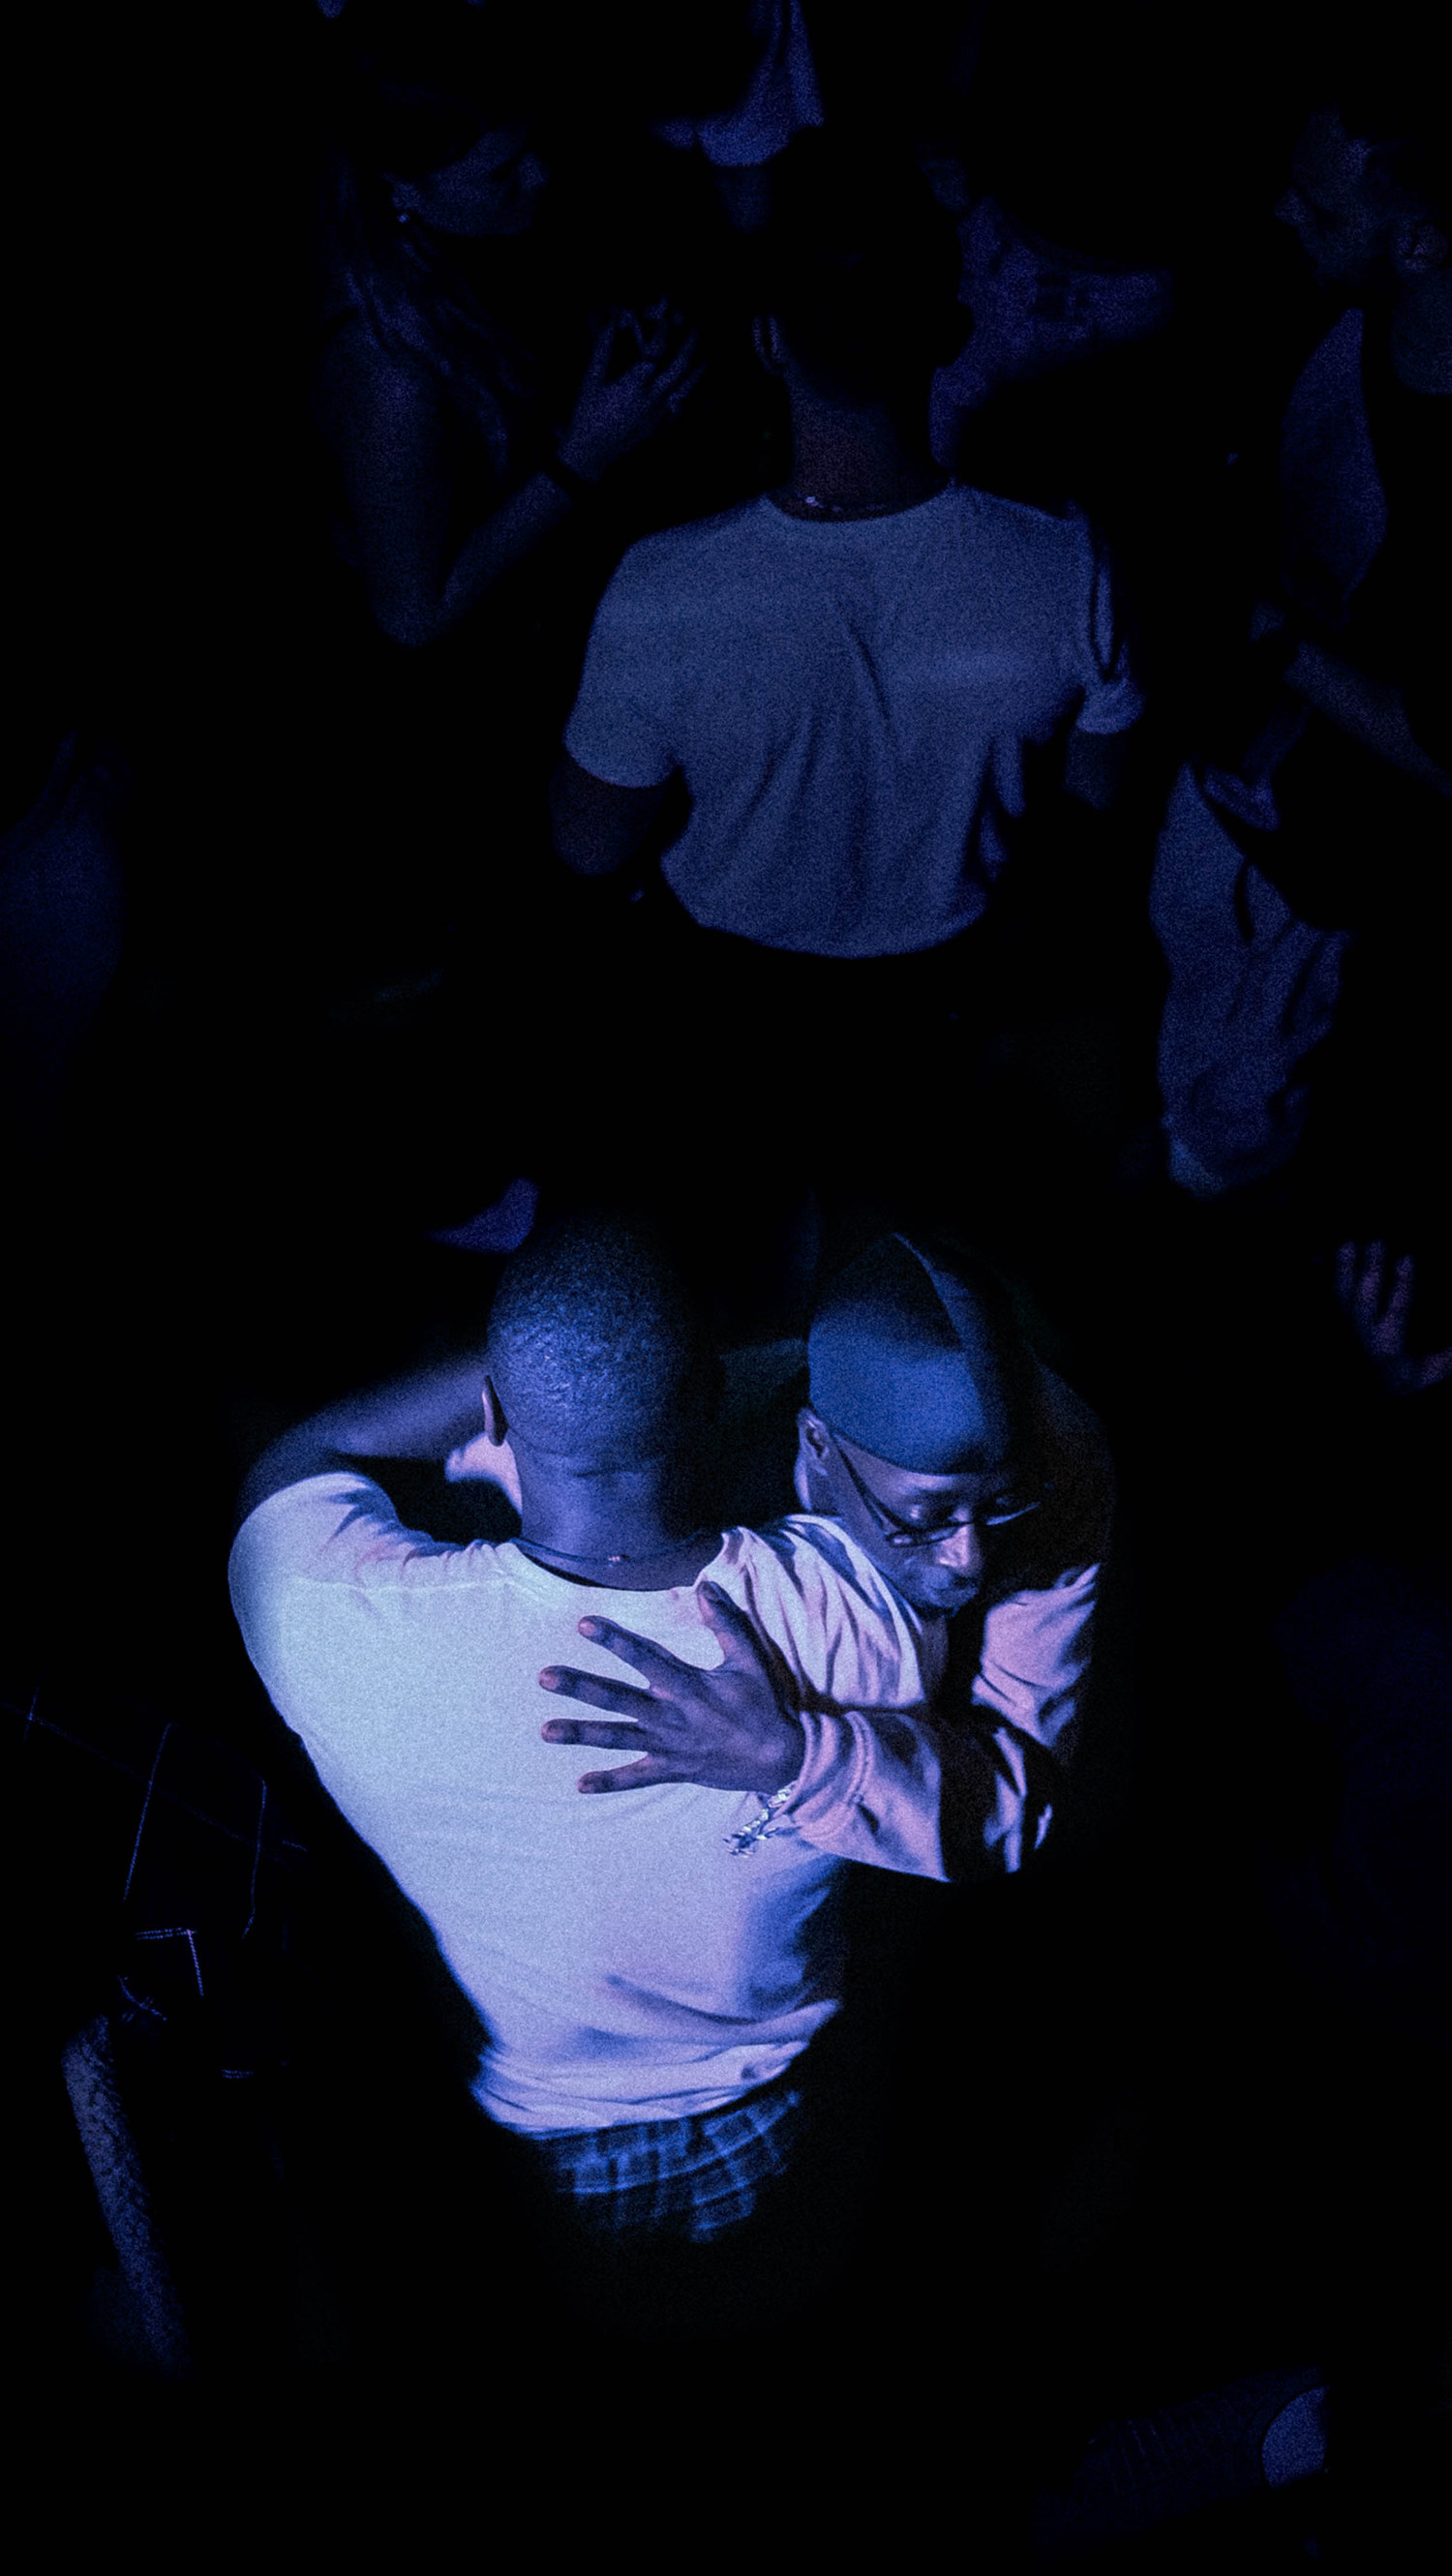 An image of two Black males dancing with each other while embracing in a club.